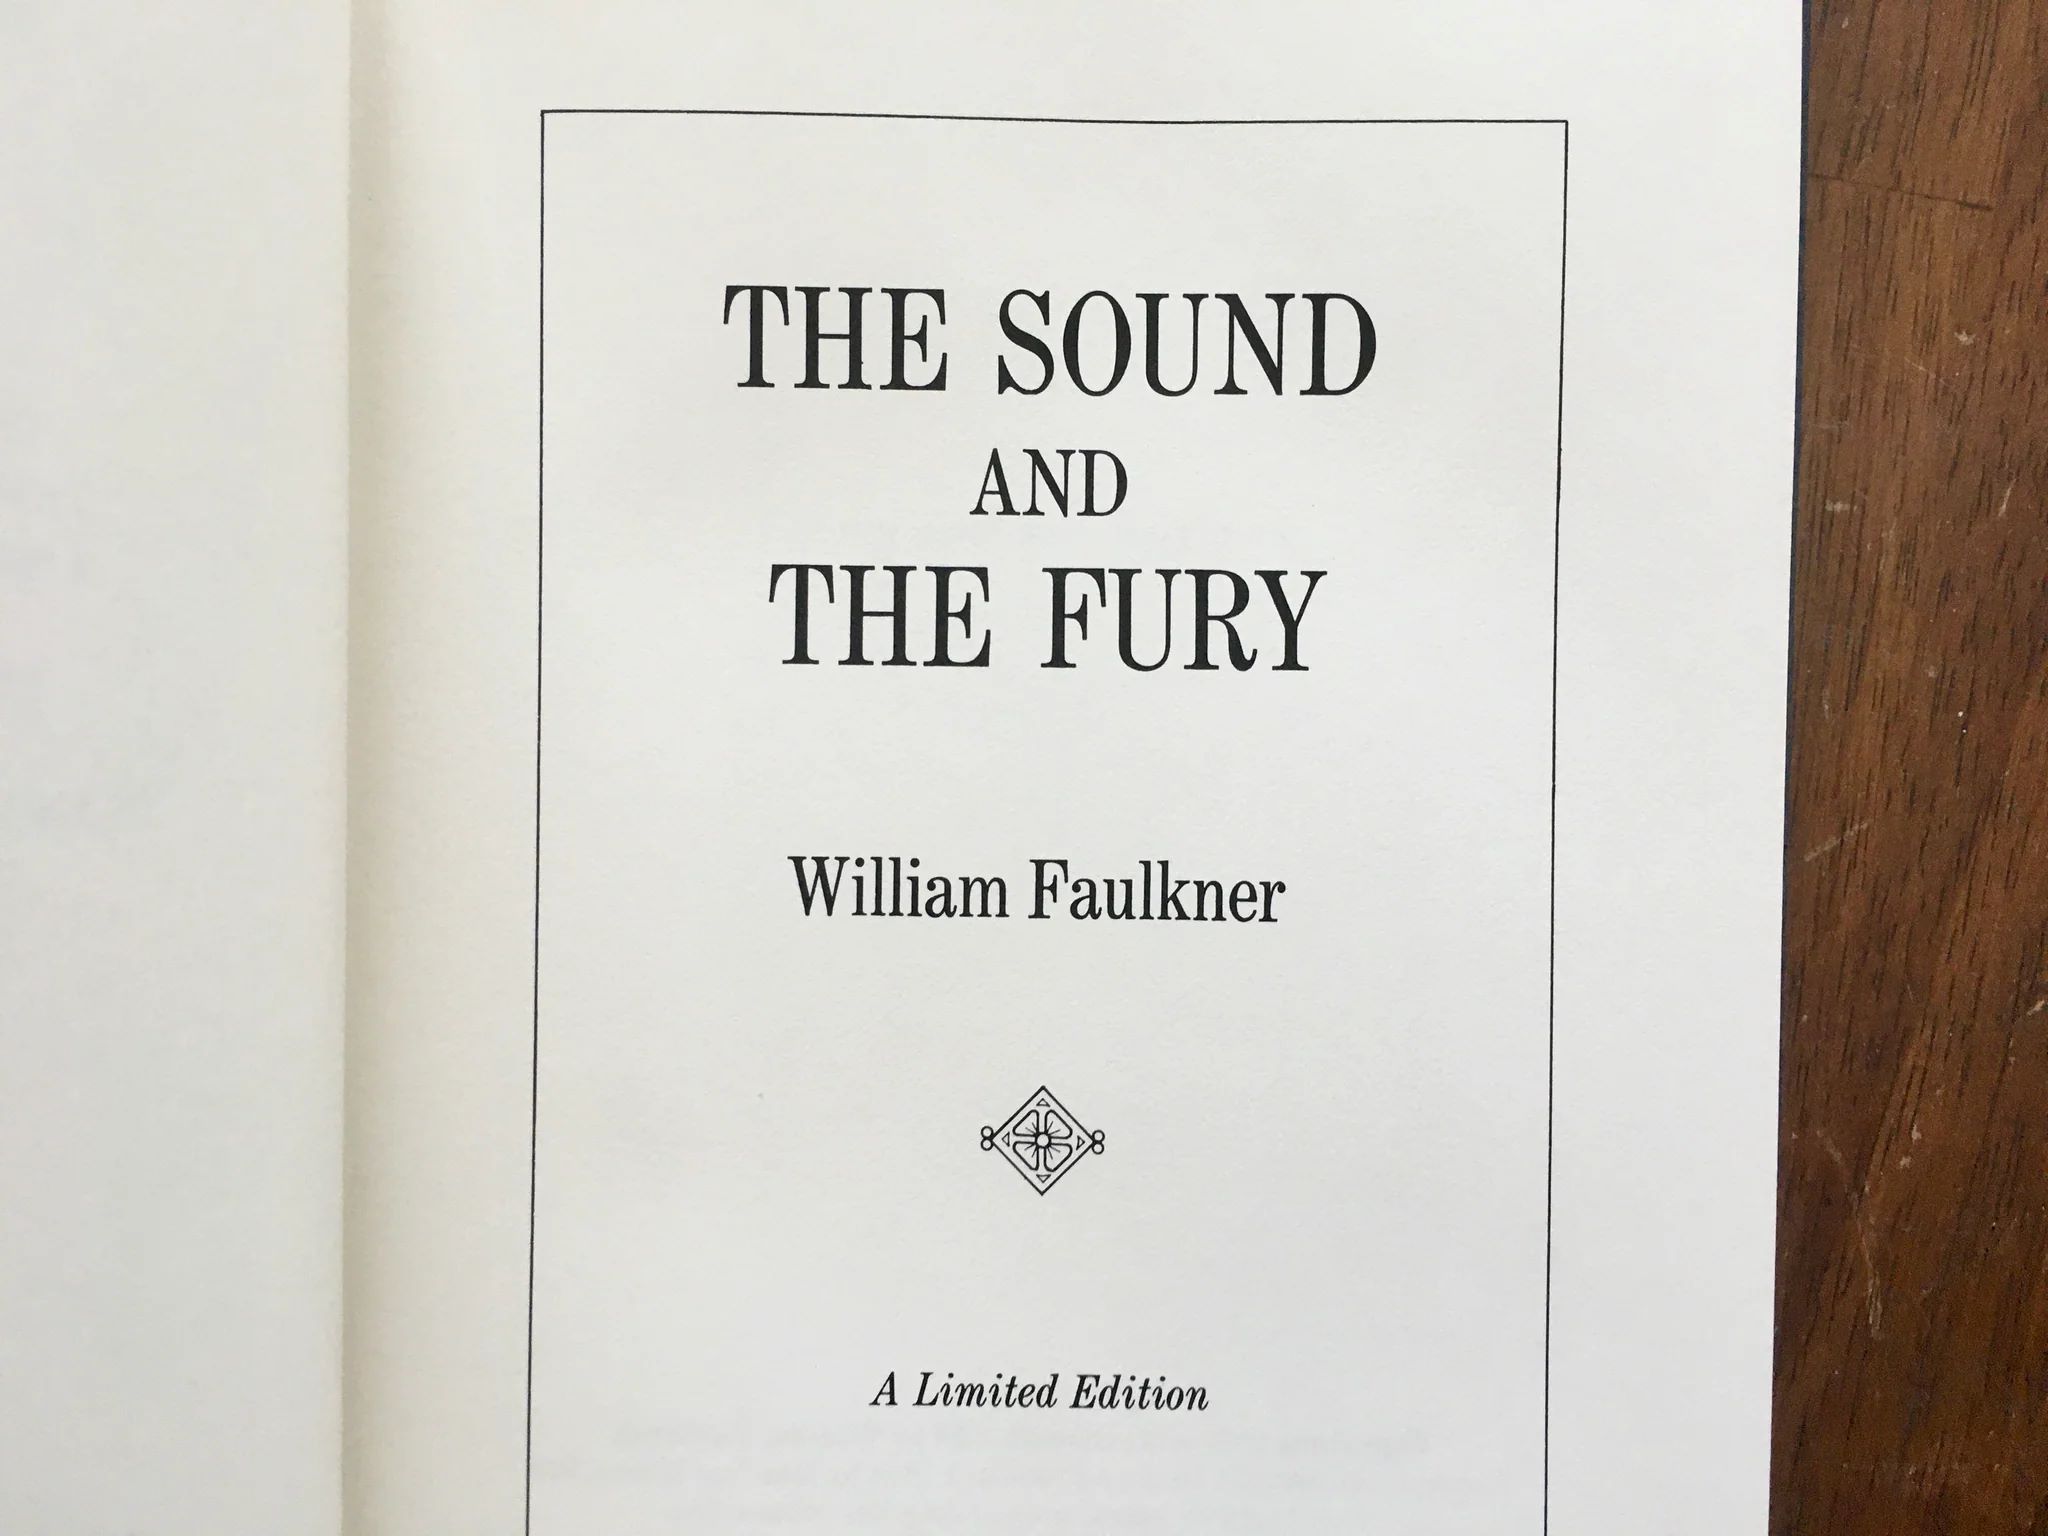 14-mind-blowing-facts-about-the-sound-and-the-fury-william-faulkner